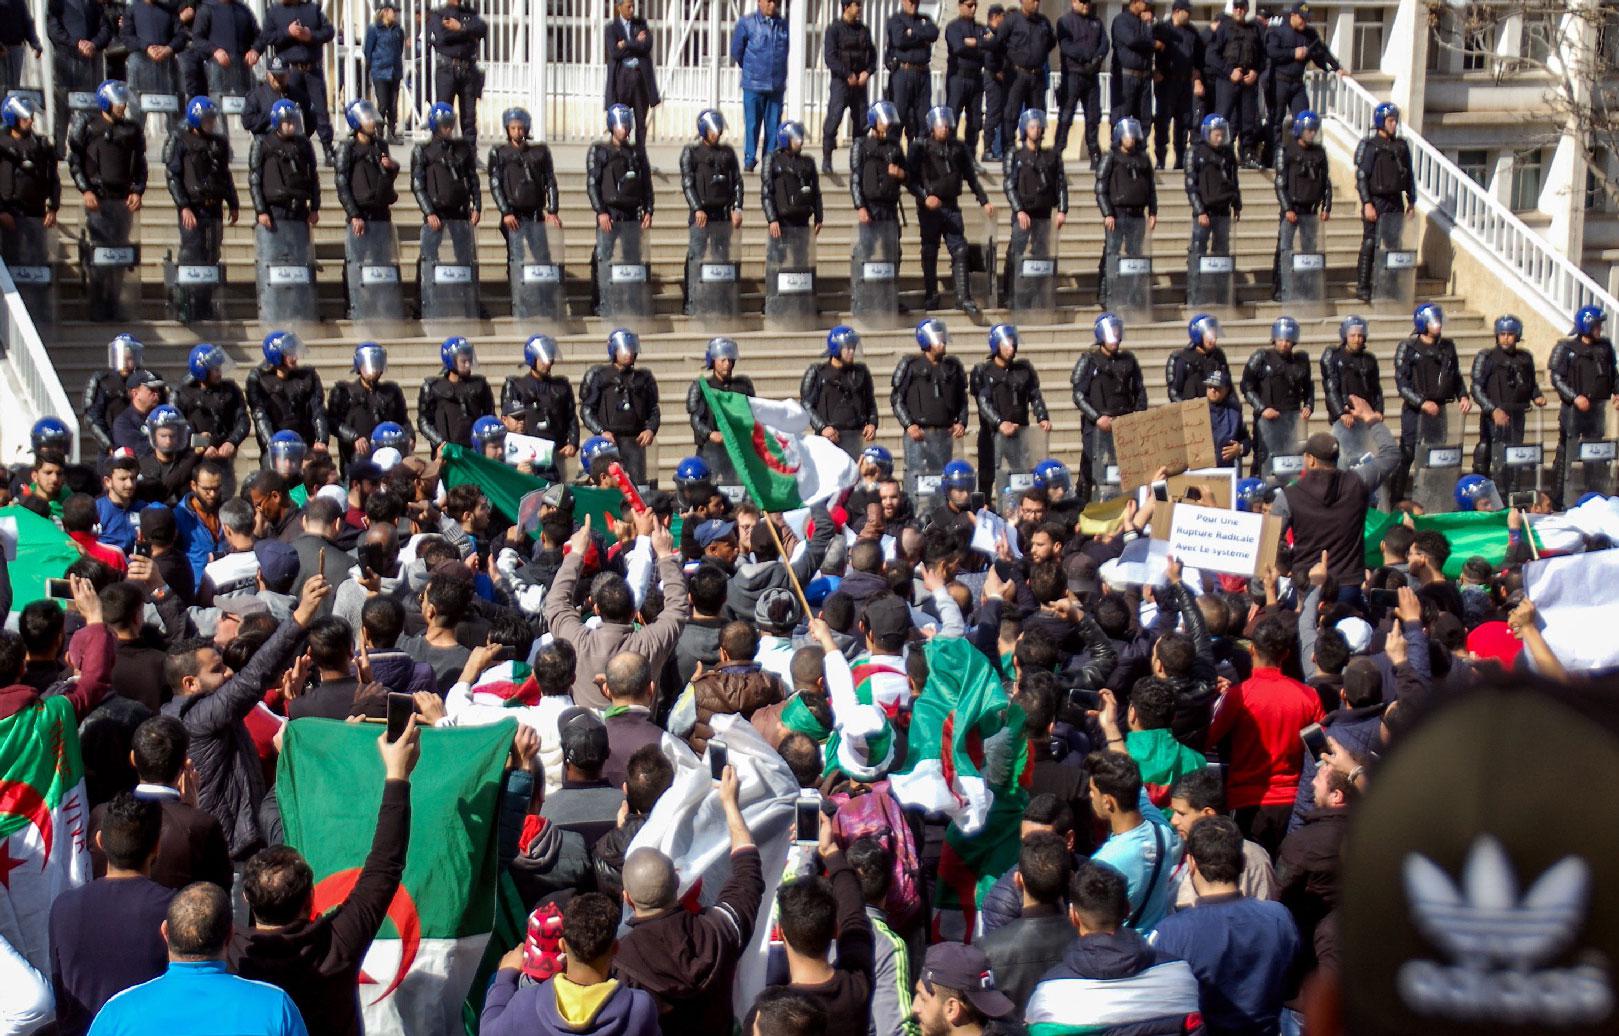 Algerians shout slogans and raise signs and national flags as they protest outside the city hall in the northern coastal city of Oran, about 410 kilometres west of the capital Algiers, on March 1, 2019, during a rally against ailing President Abdelaziz Bouteflika's bid for a fifth term in power.